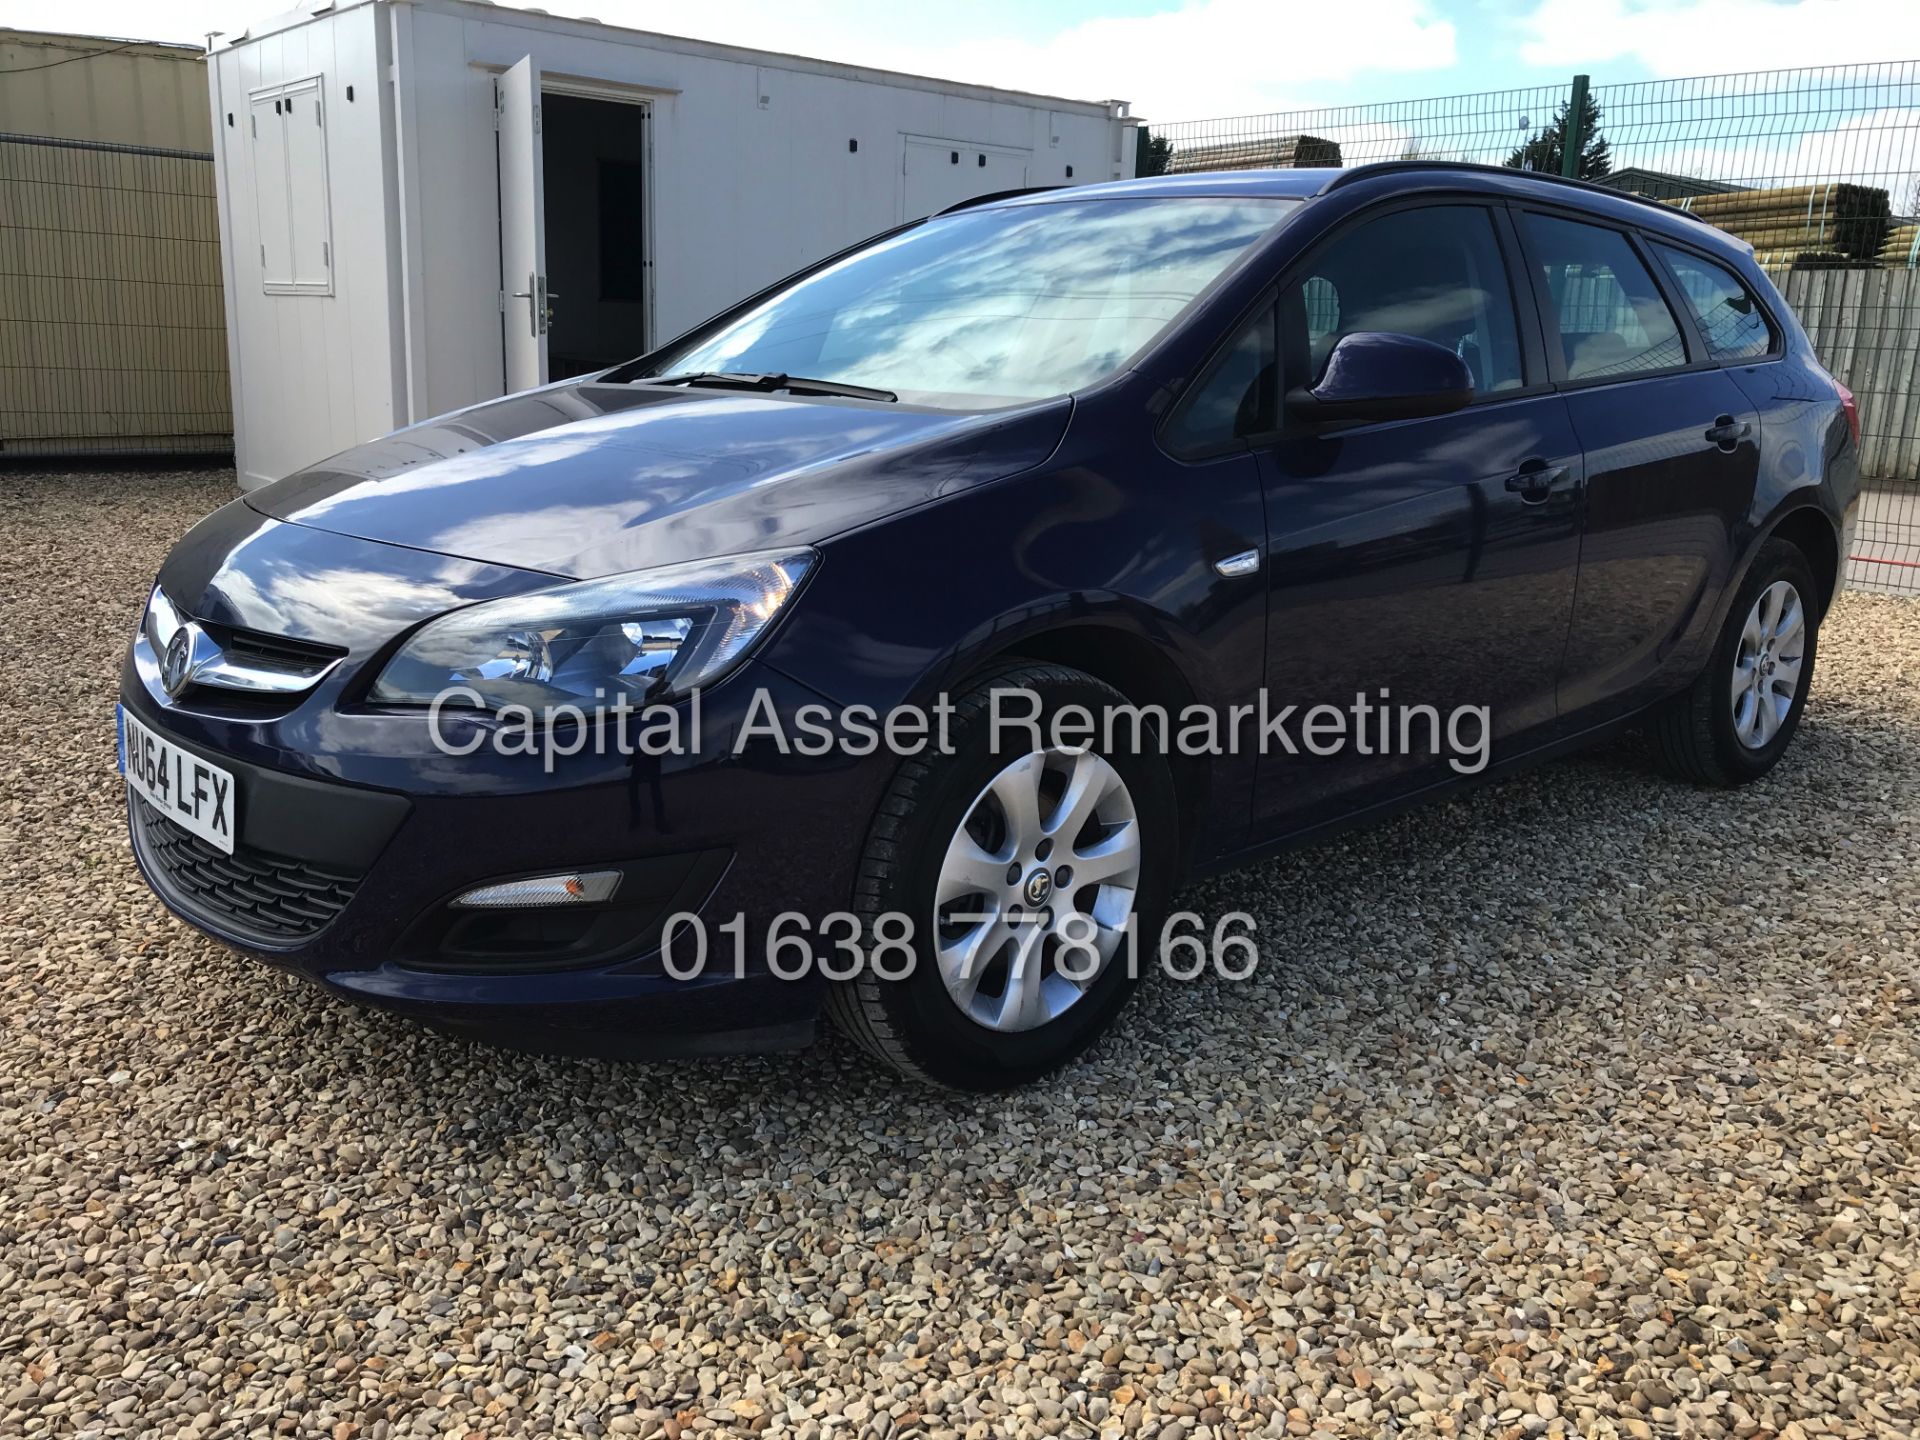 (ON SALE) VAUXHALL ASTRA 1.6CDTI "DESIGN" ESTATE (2015 MODEL) 1 OWNER FSH - AIR CON - CRUISE